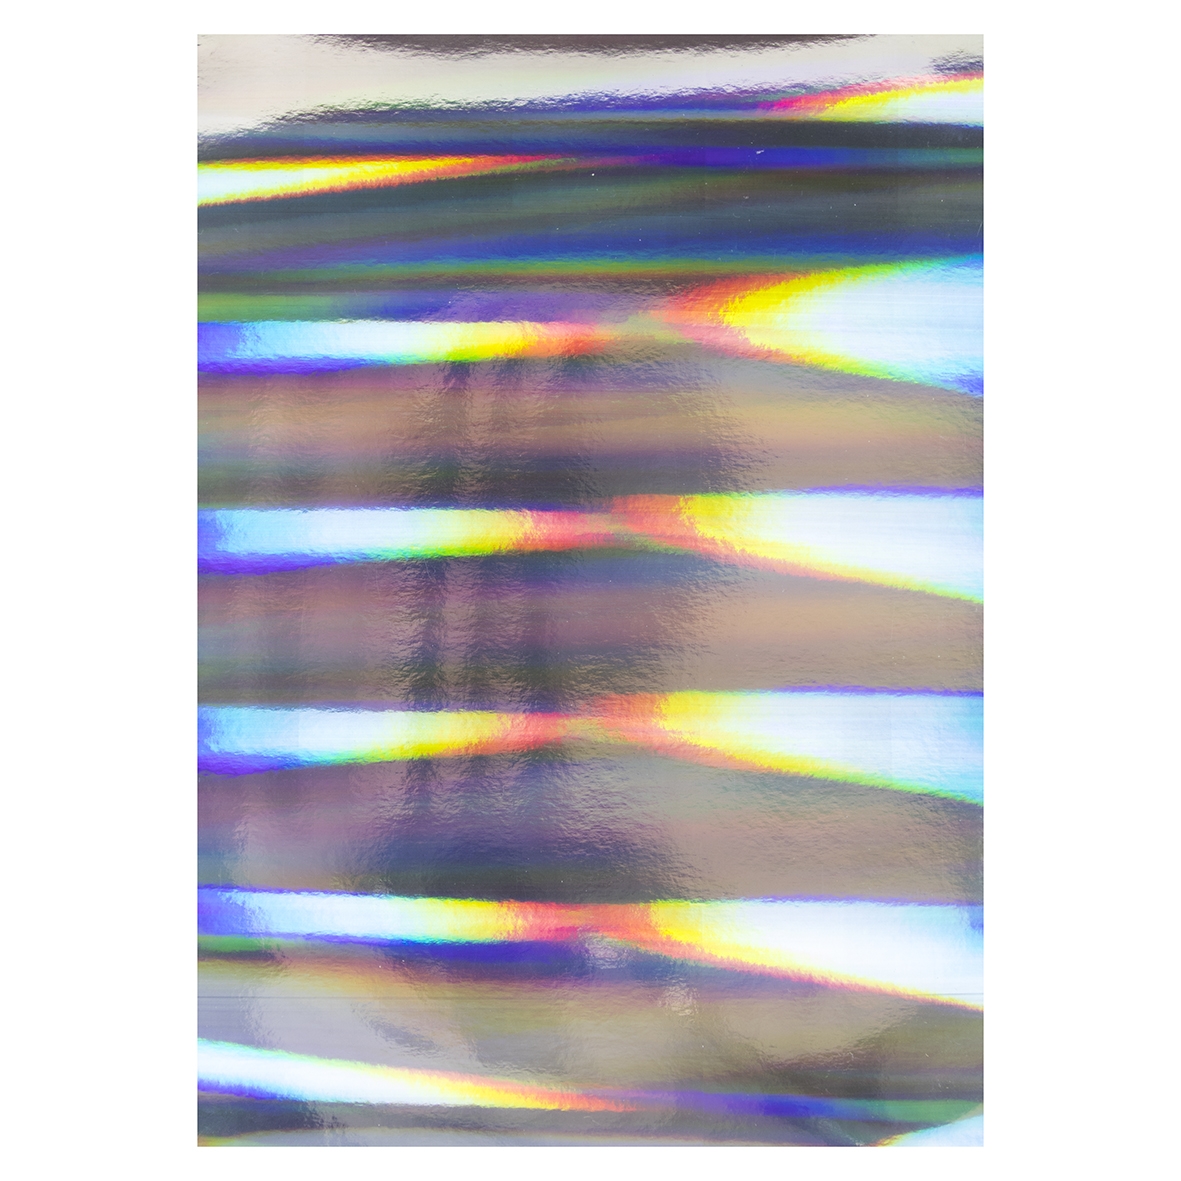 5 A4 SHEETS SILVER HOLOGRAPHIC CARD PILLARS OF LIGHT CARD LASER CARD 